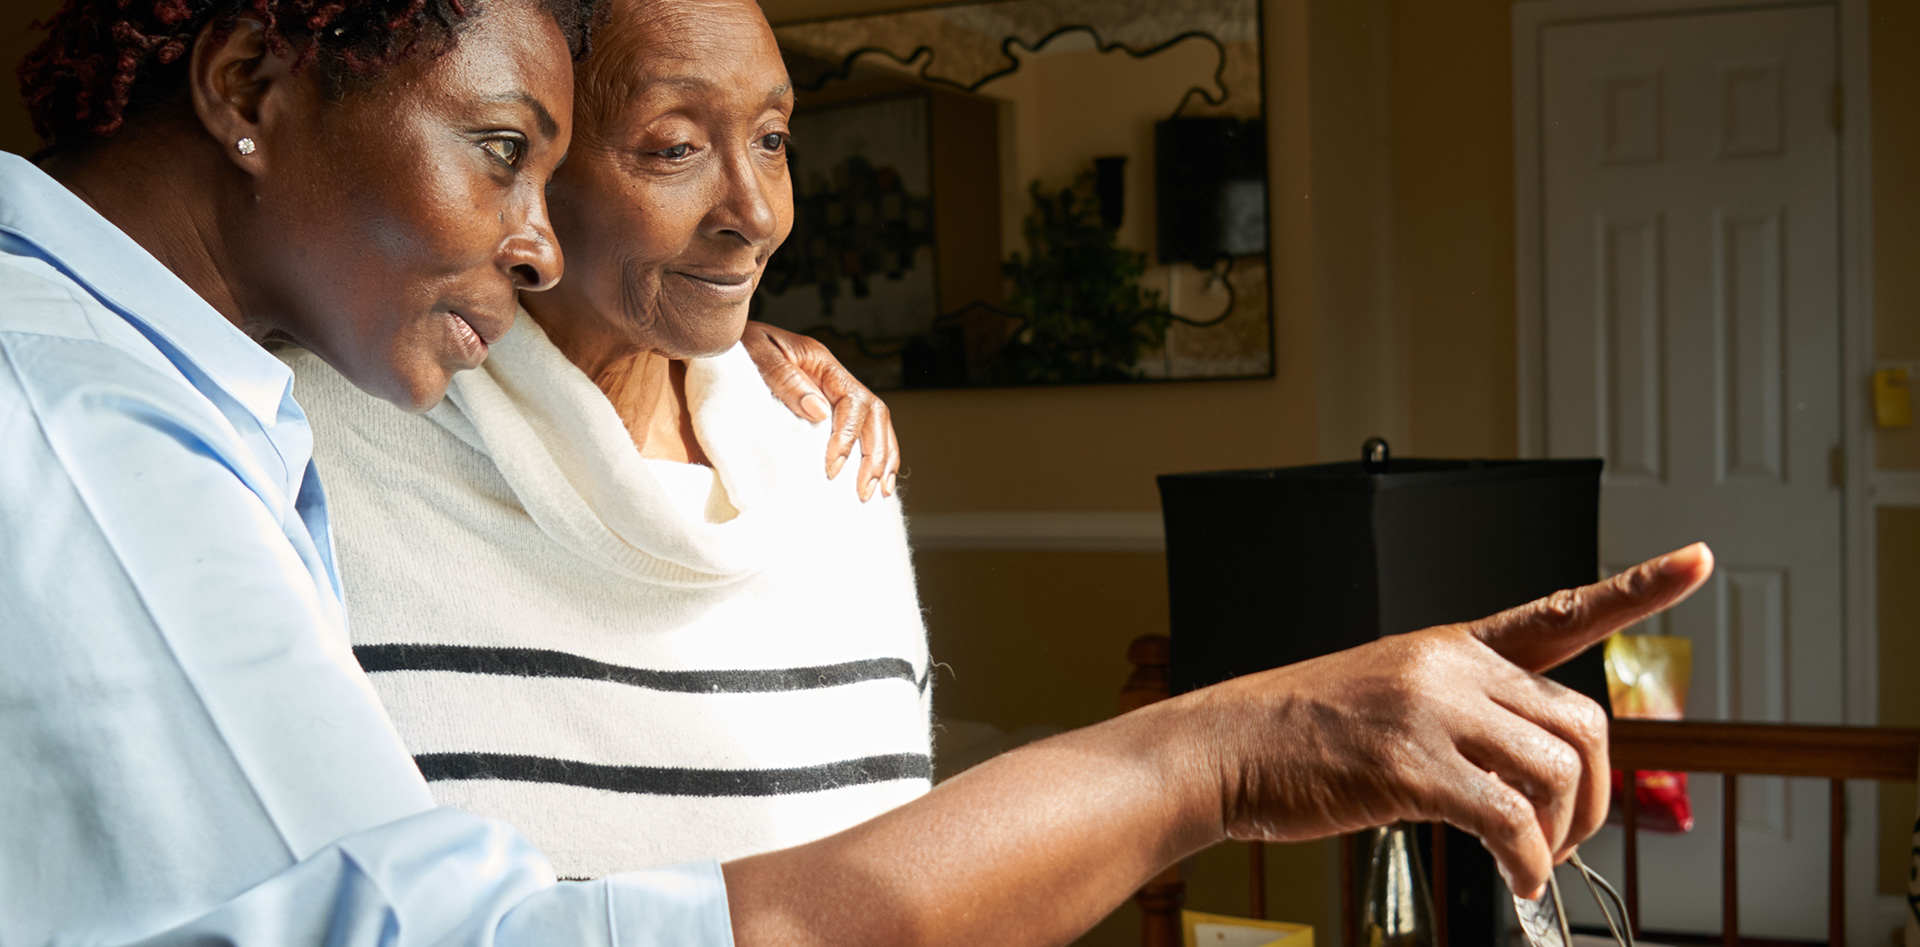 Senior Care Business is Growing, Here's What to Consider Before Buying